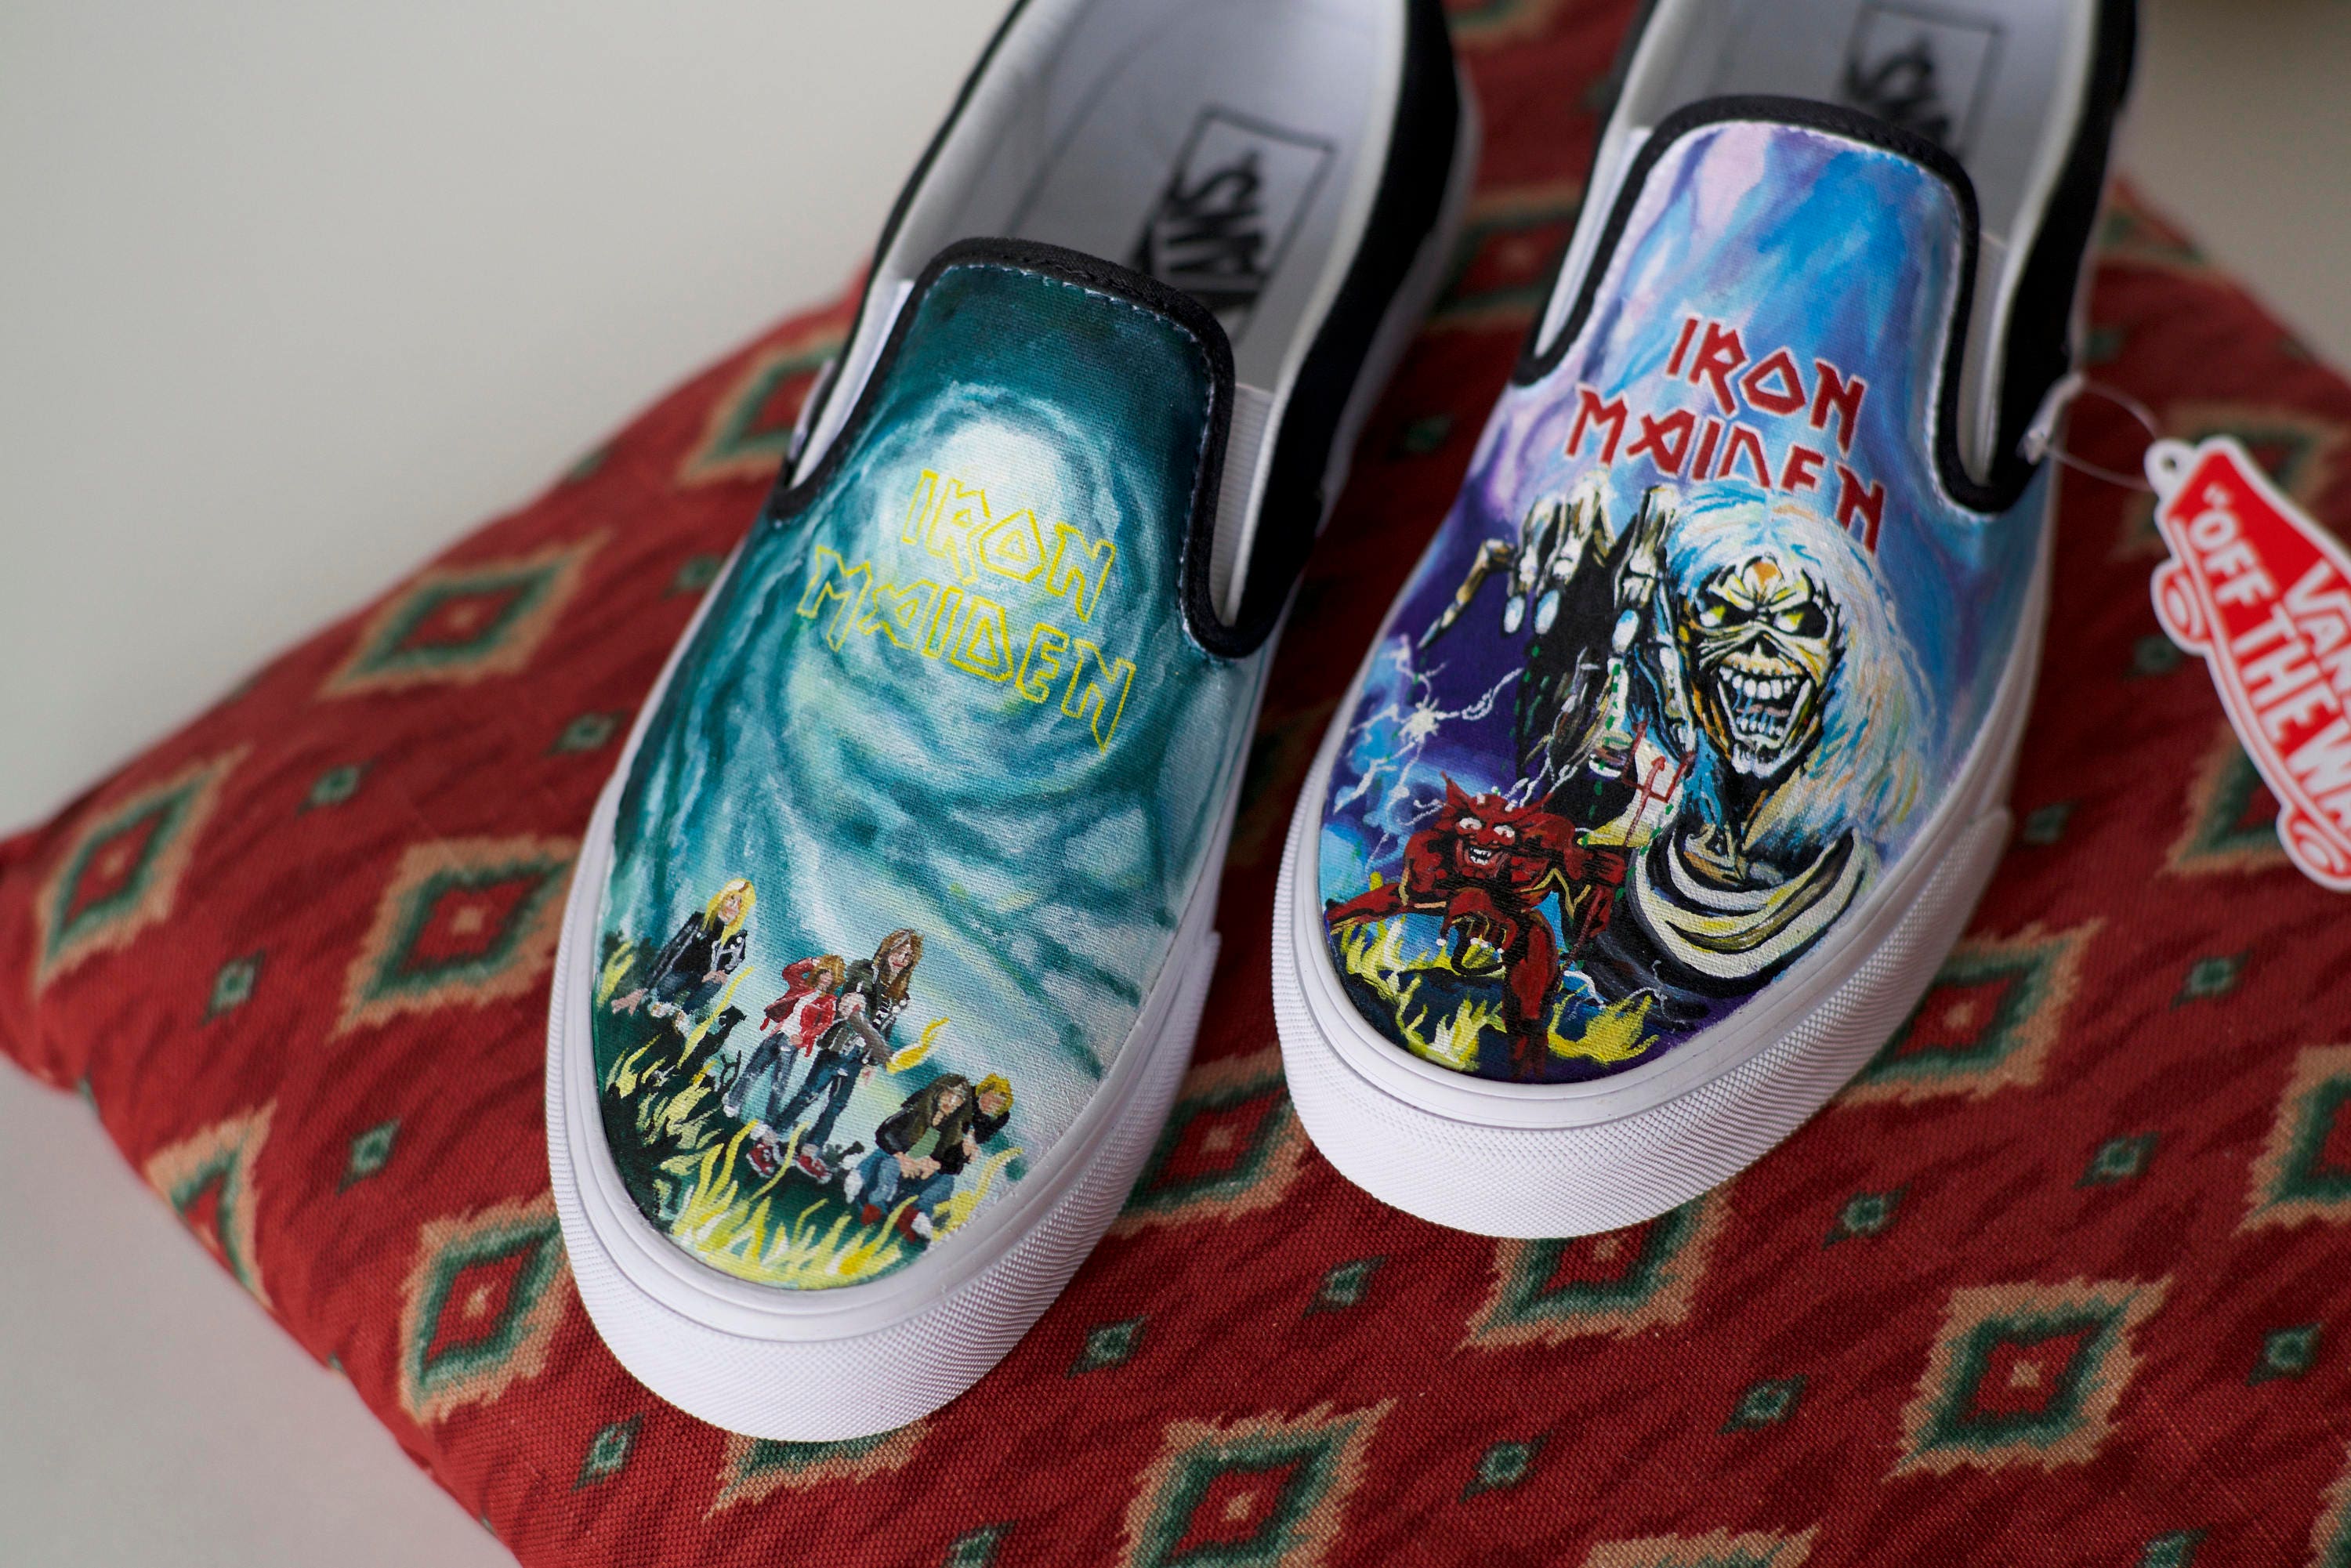 Agrarisch nek Of later Custom Hand-painted Iron Maiden Vans Shoes - Etsy